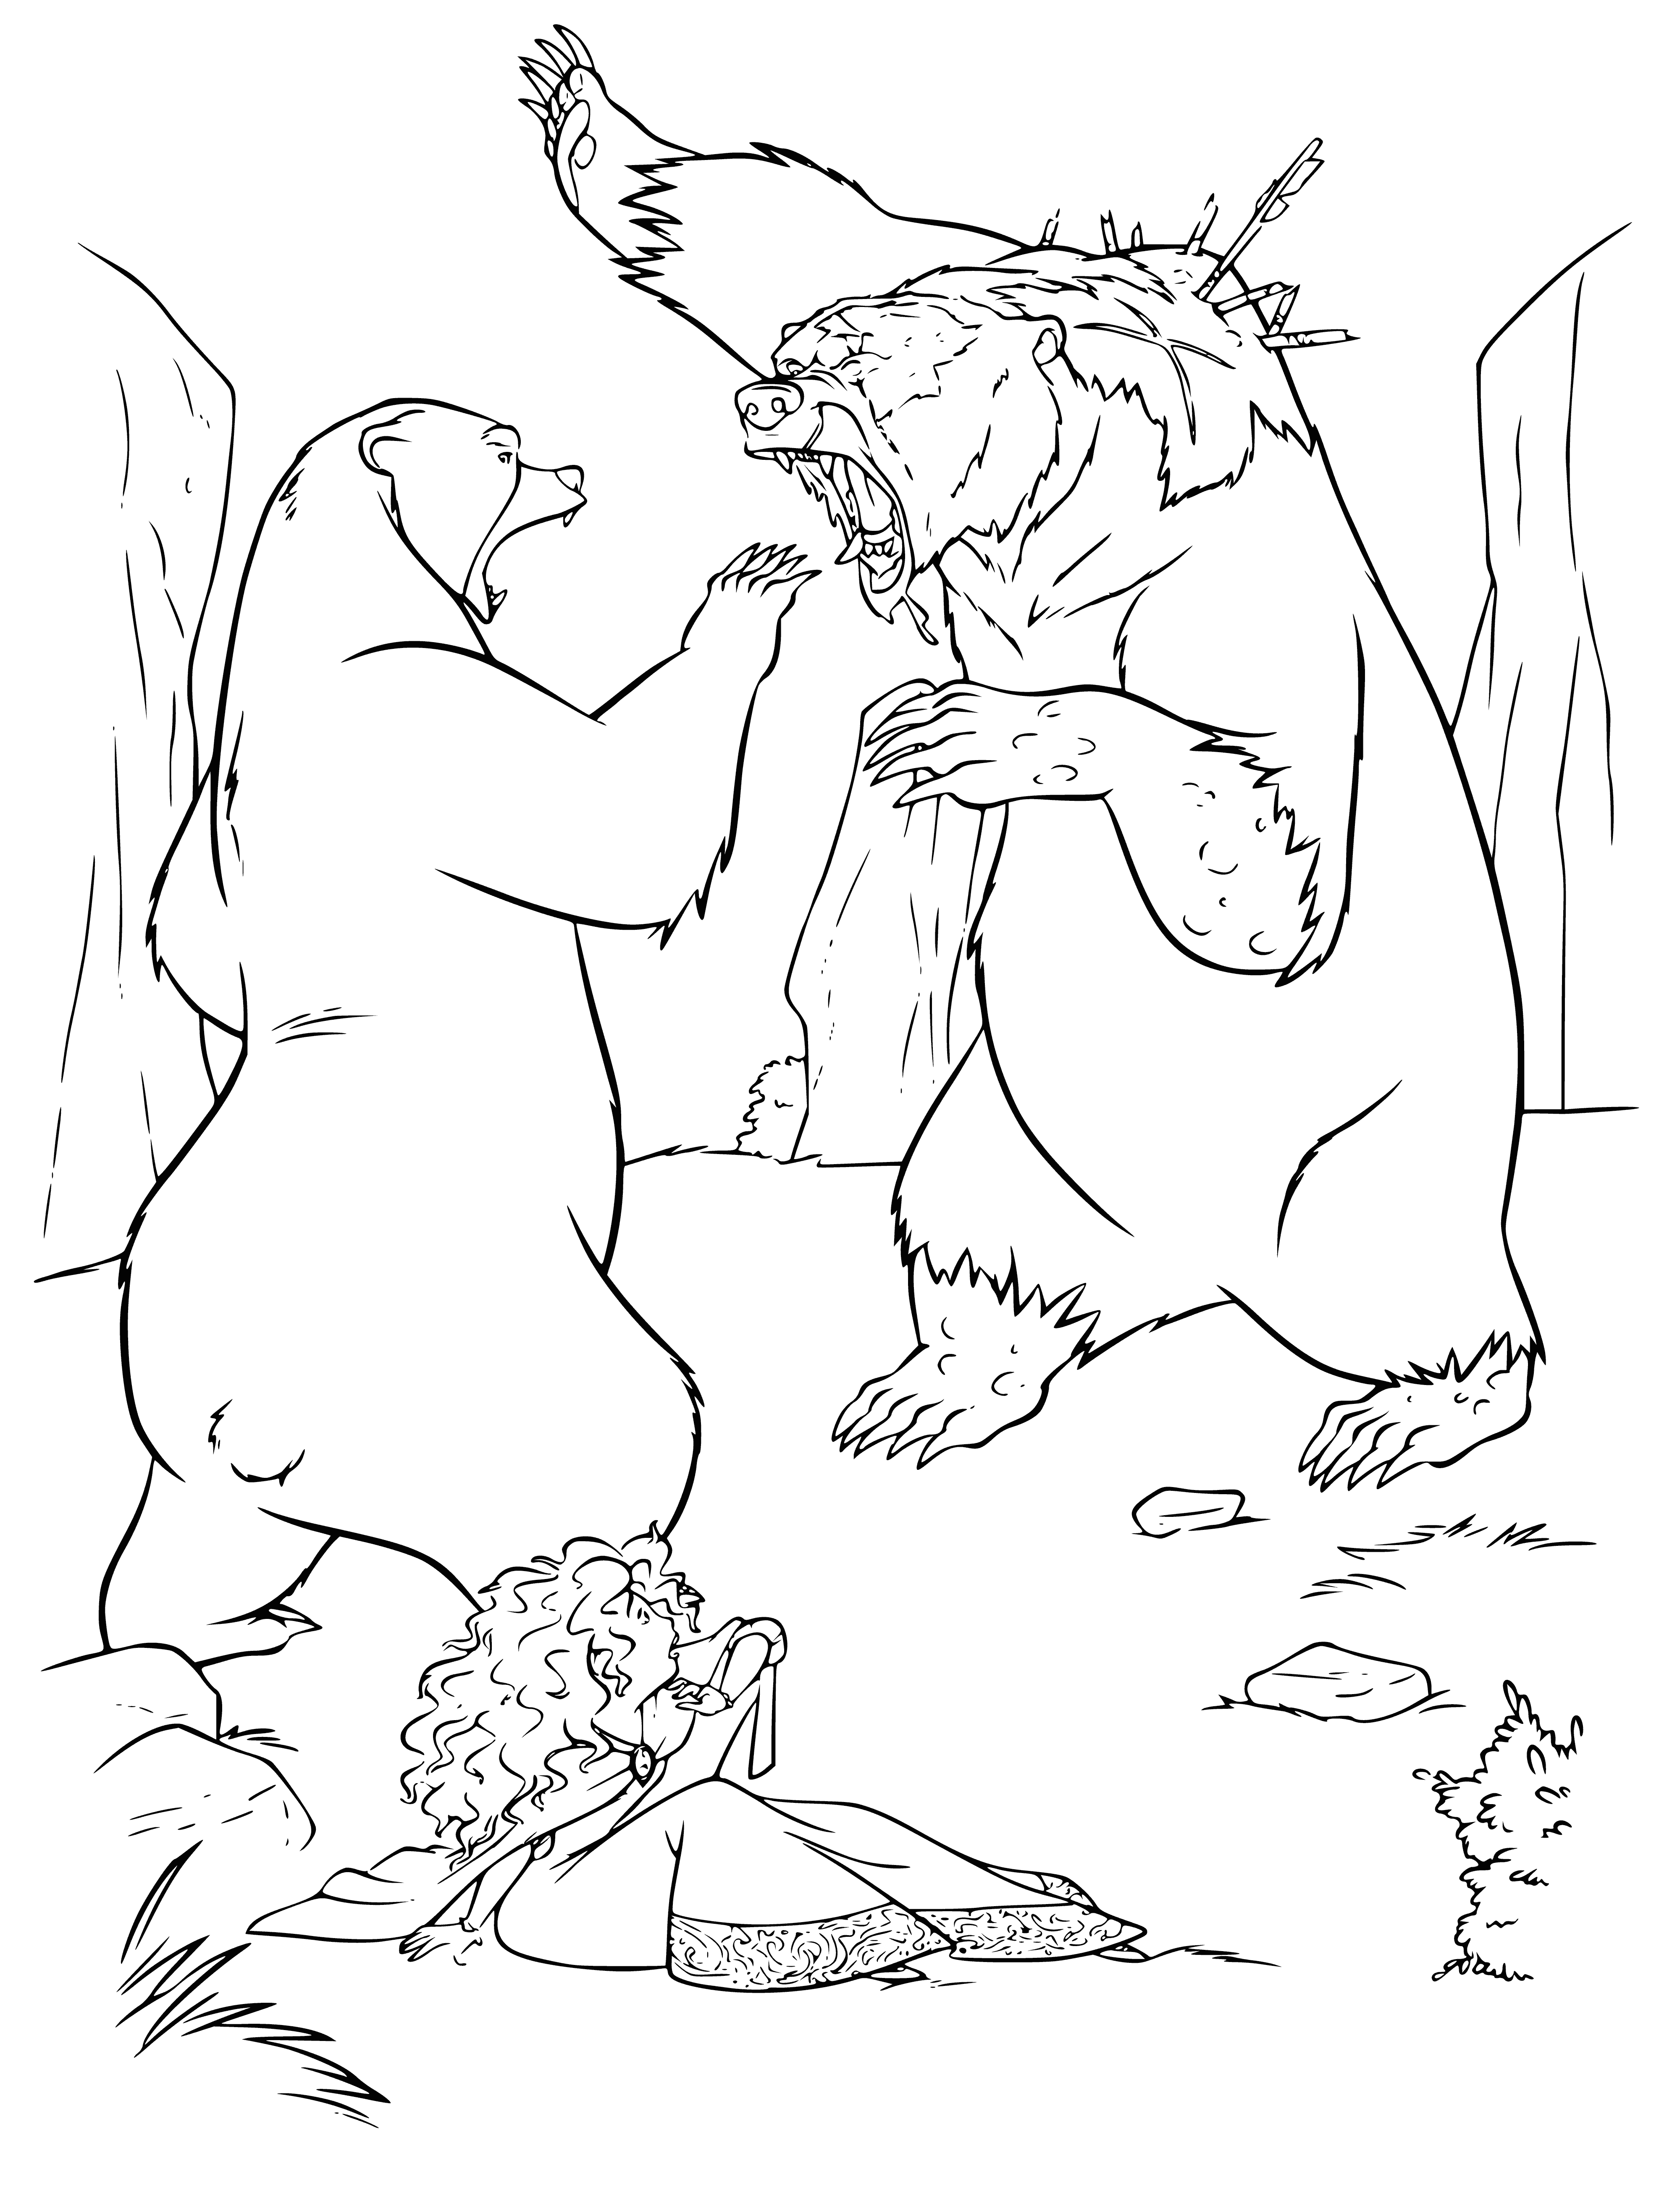 coloring page: Brave and loving Queen Elinor protects her family and is always ready to stand up for what she believes in - no matter the cost.